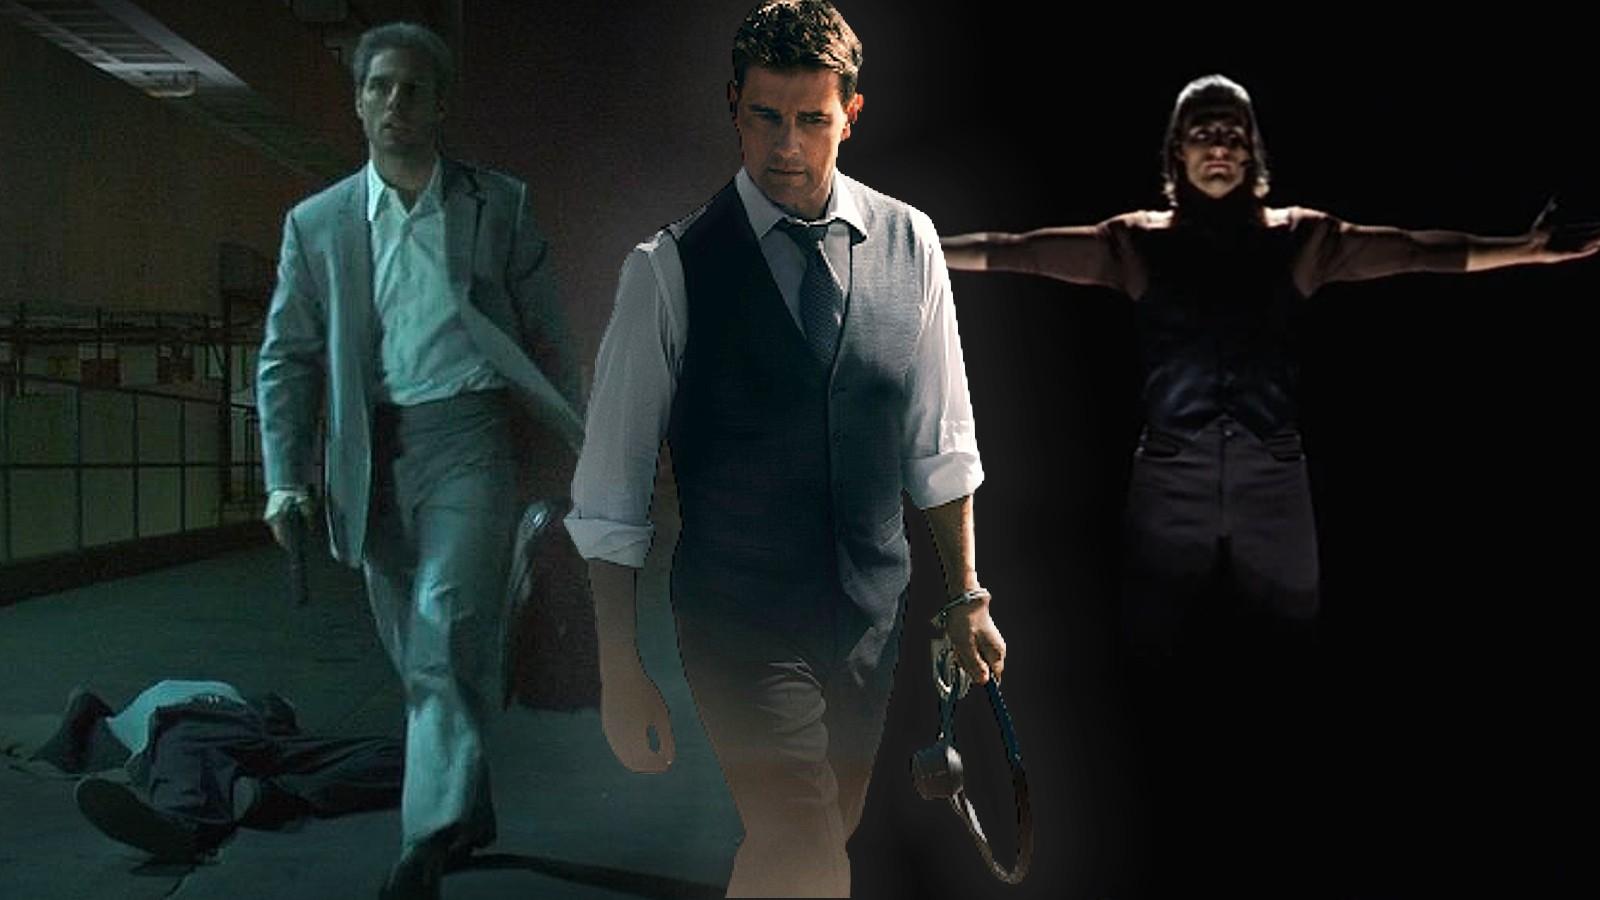 Tom Cruise in Collateral, Mission: Impossible, and Magnolia